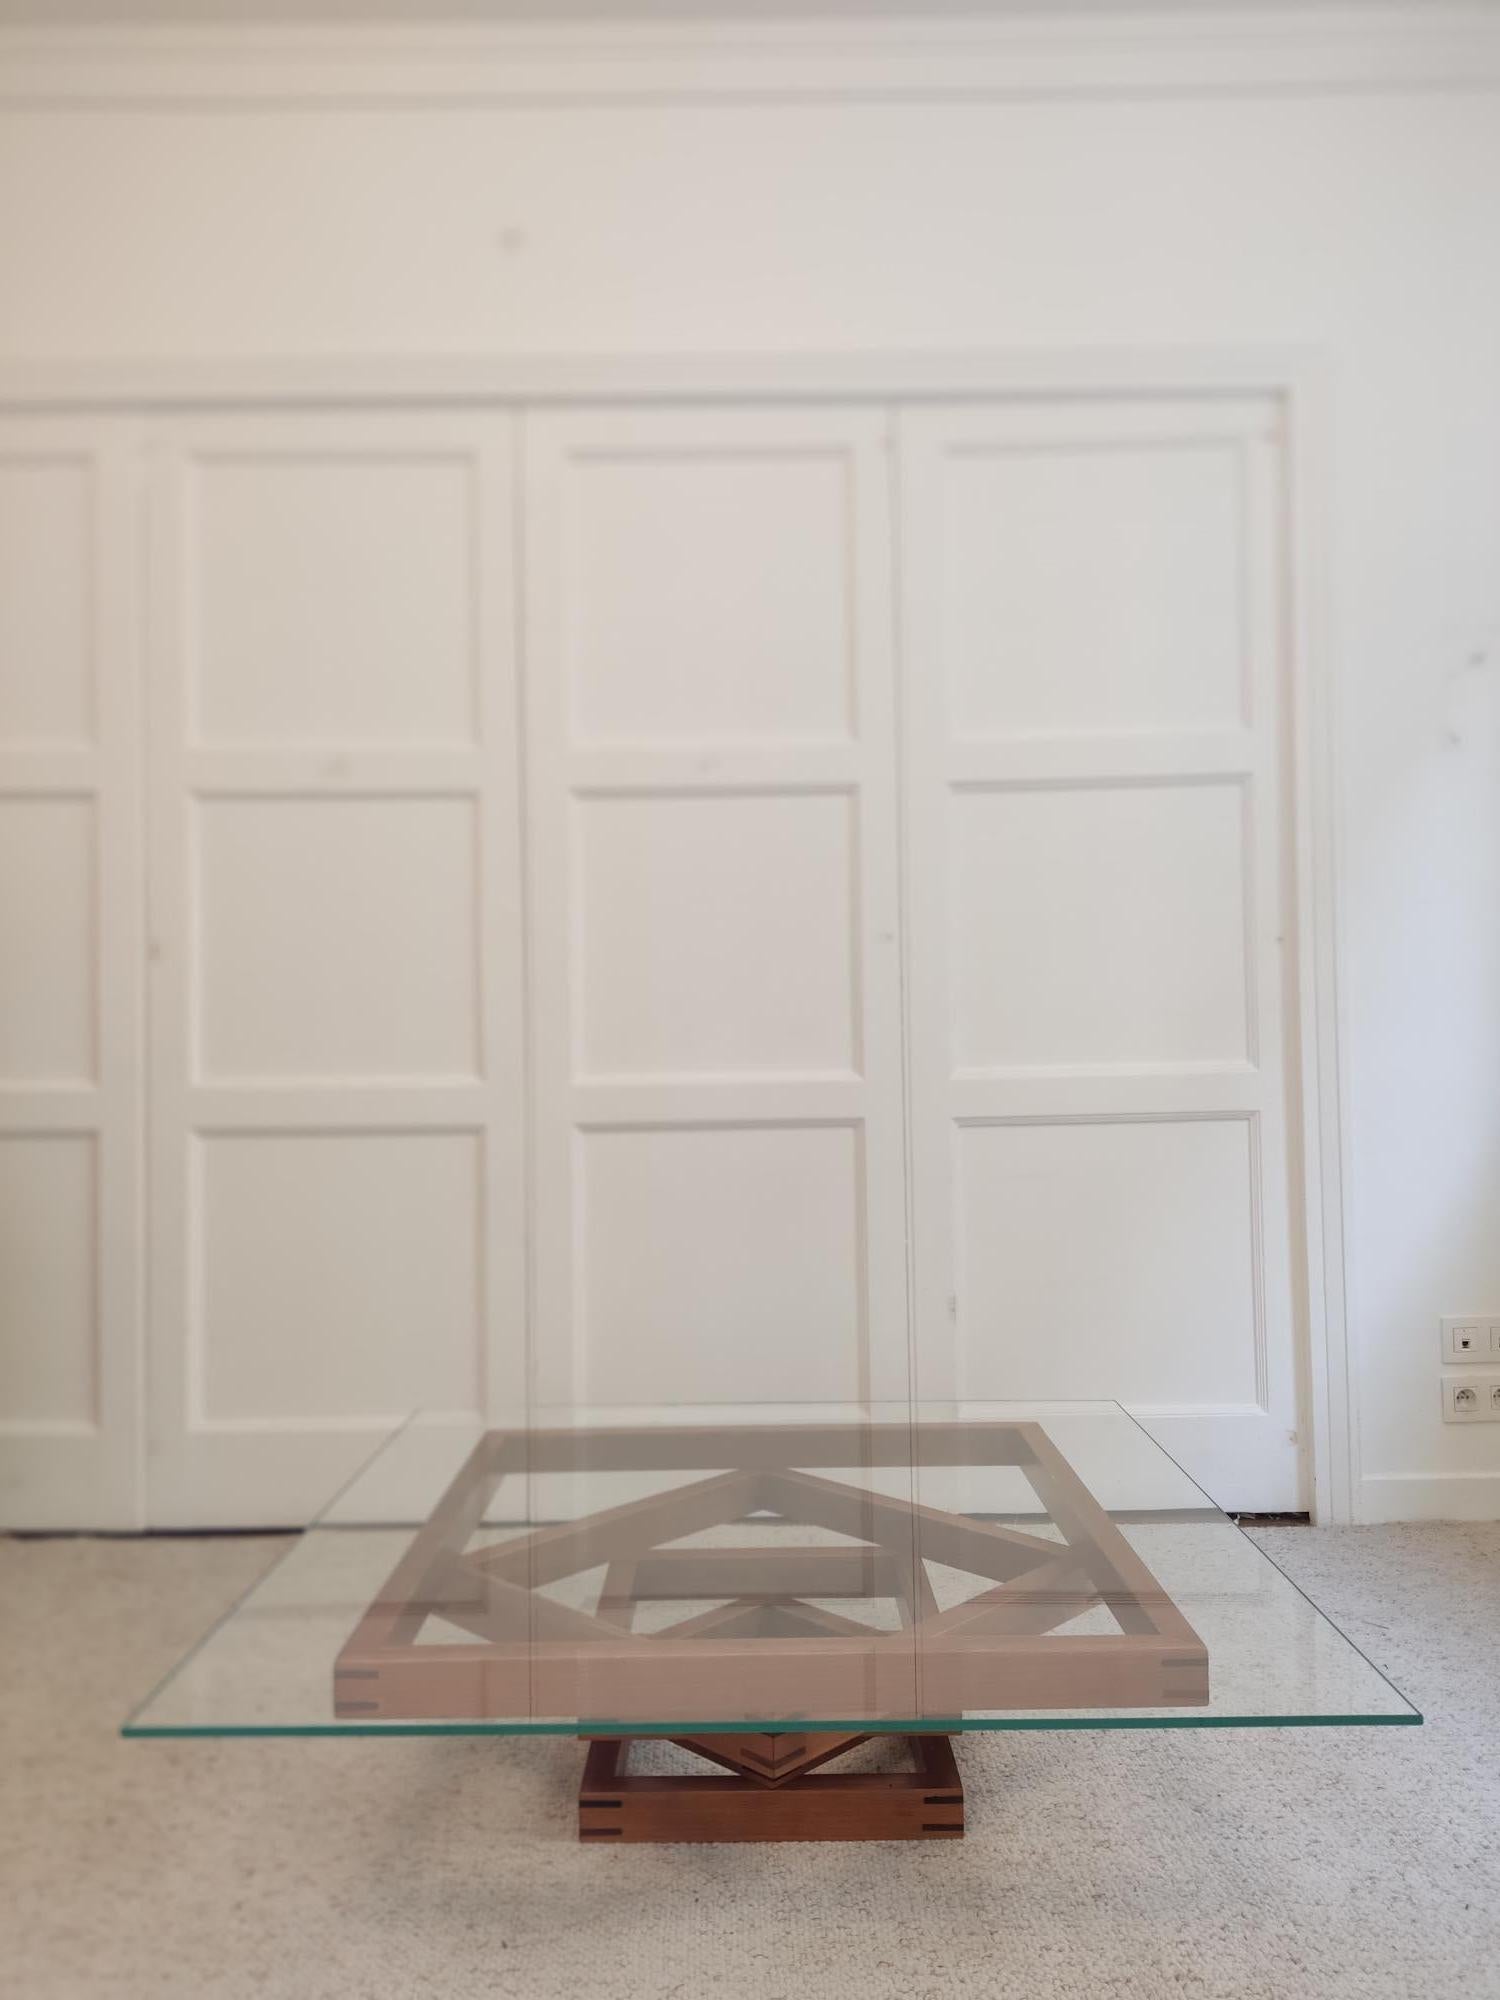 Square Italian coffee table called 